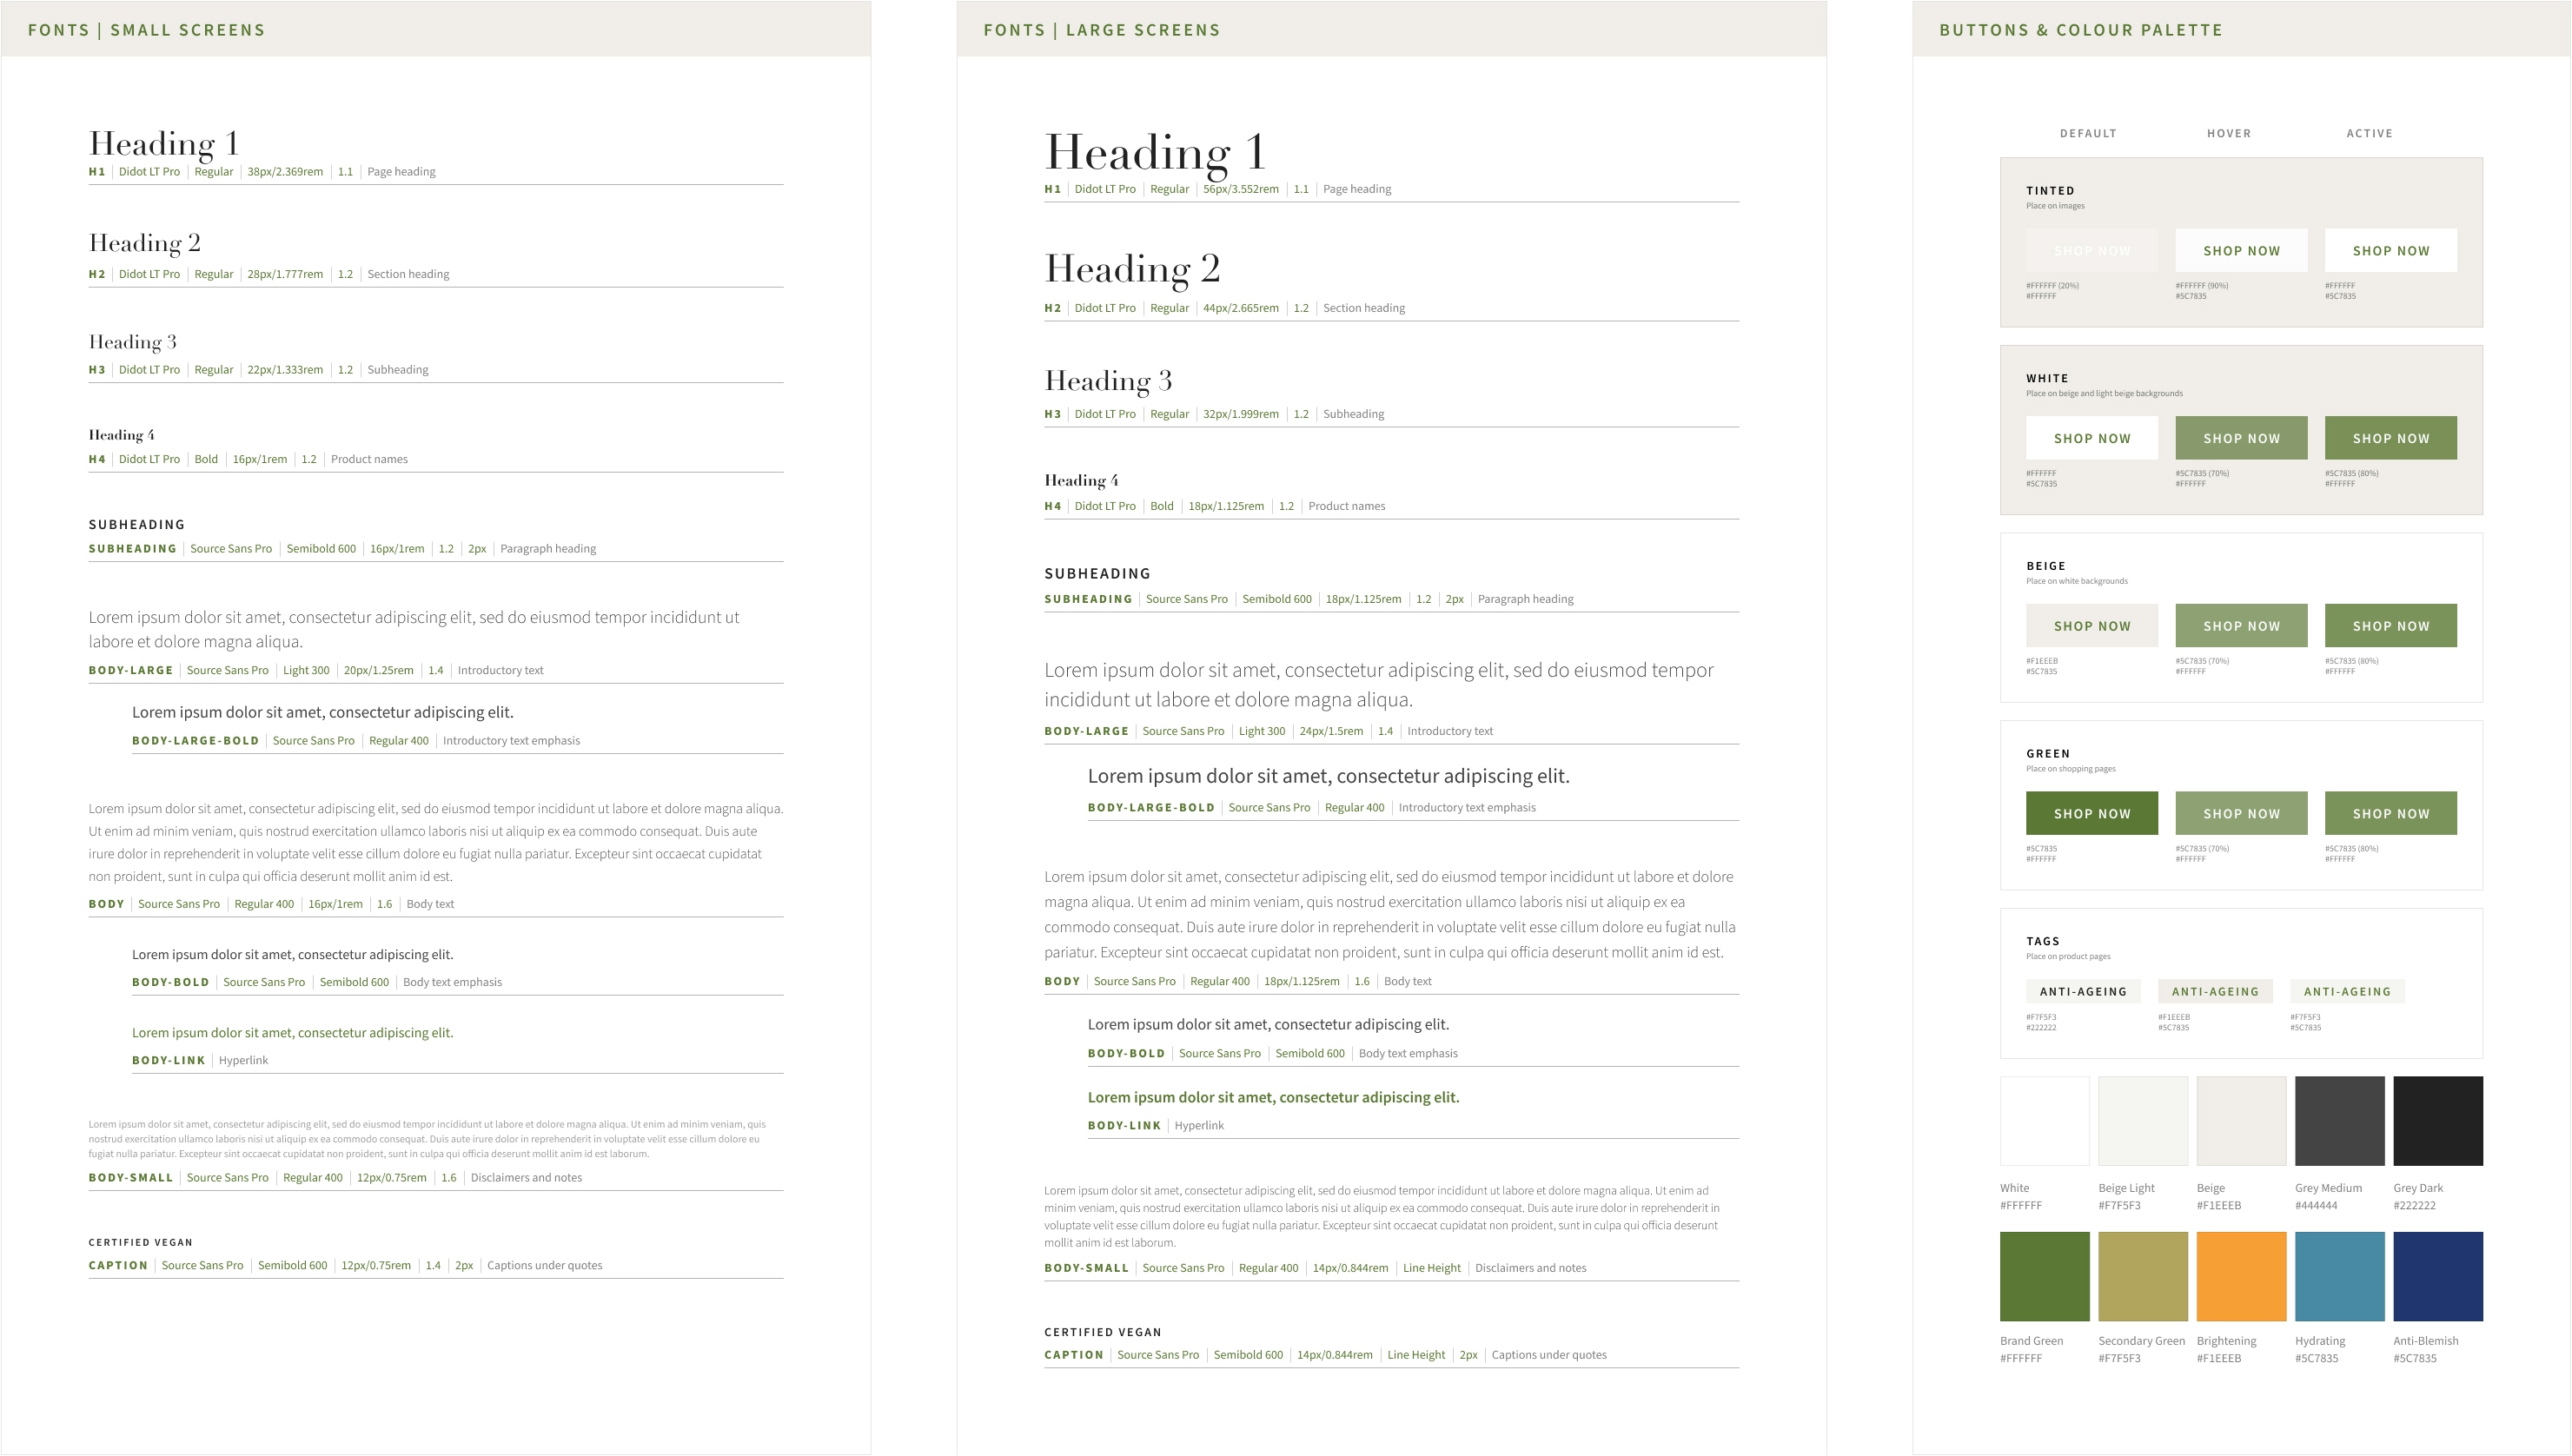 Style guide for different screen sizes including headings, fonts and colours.